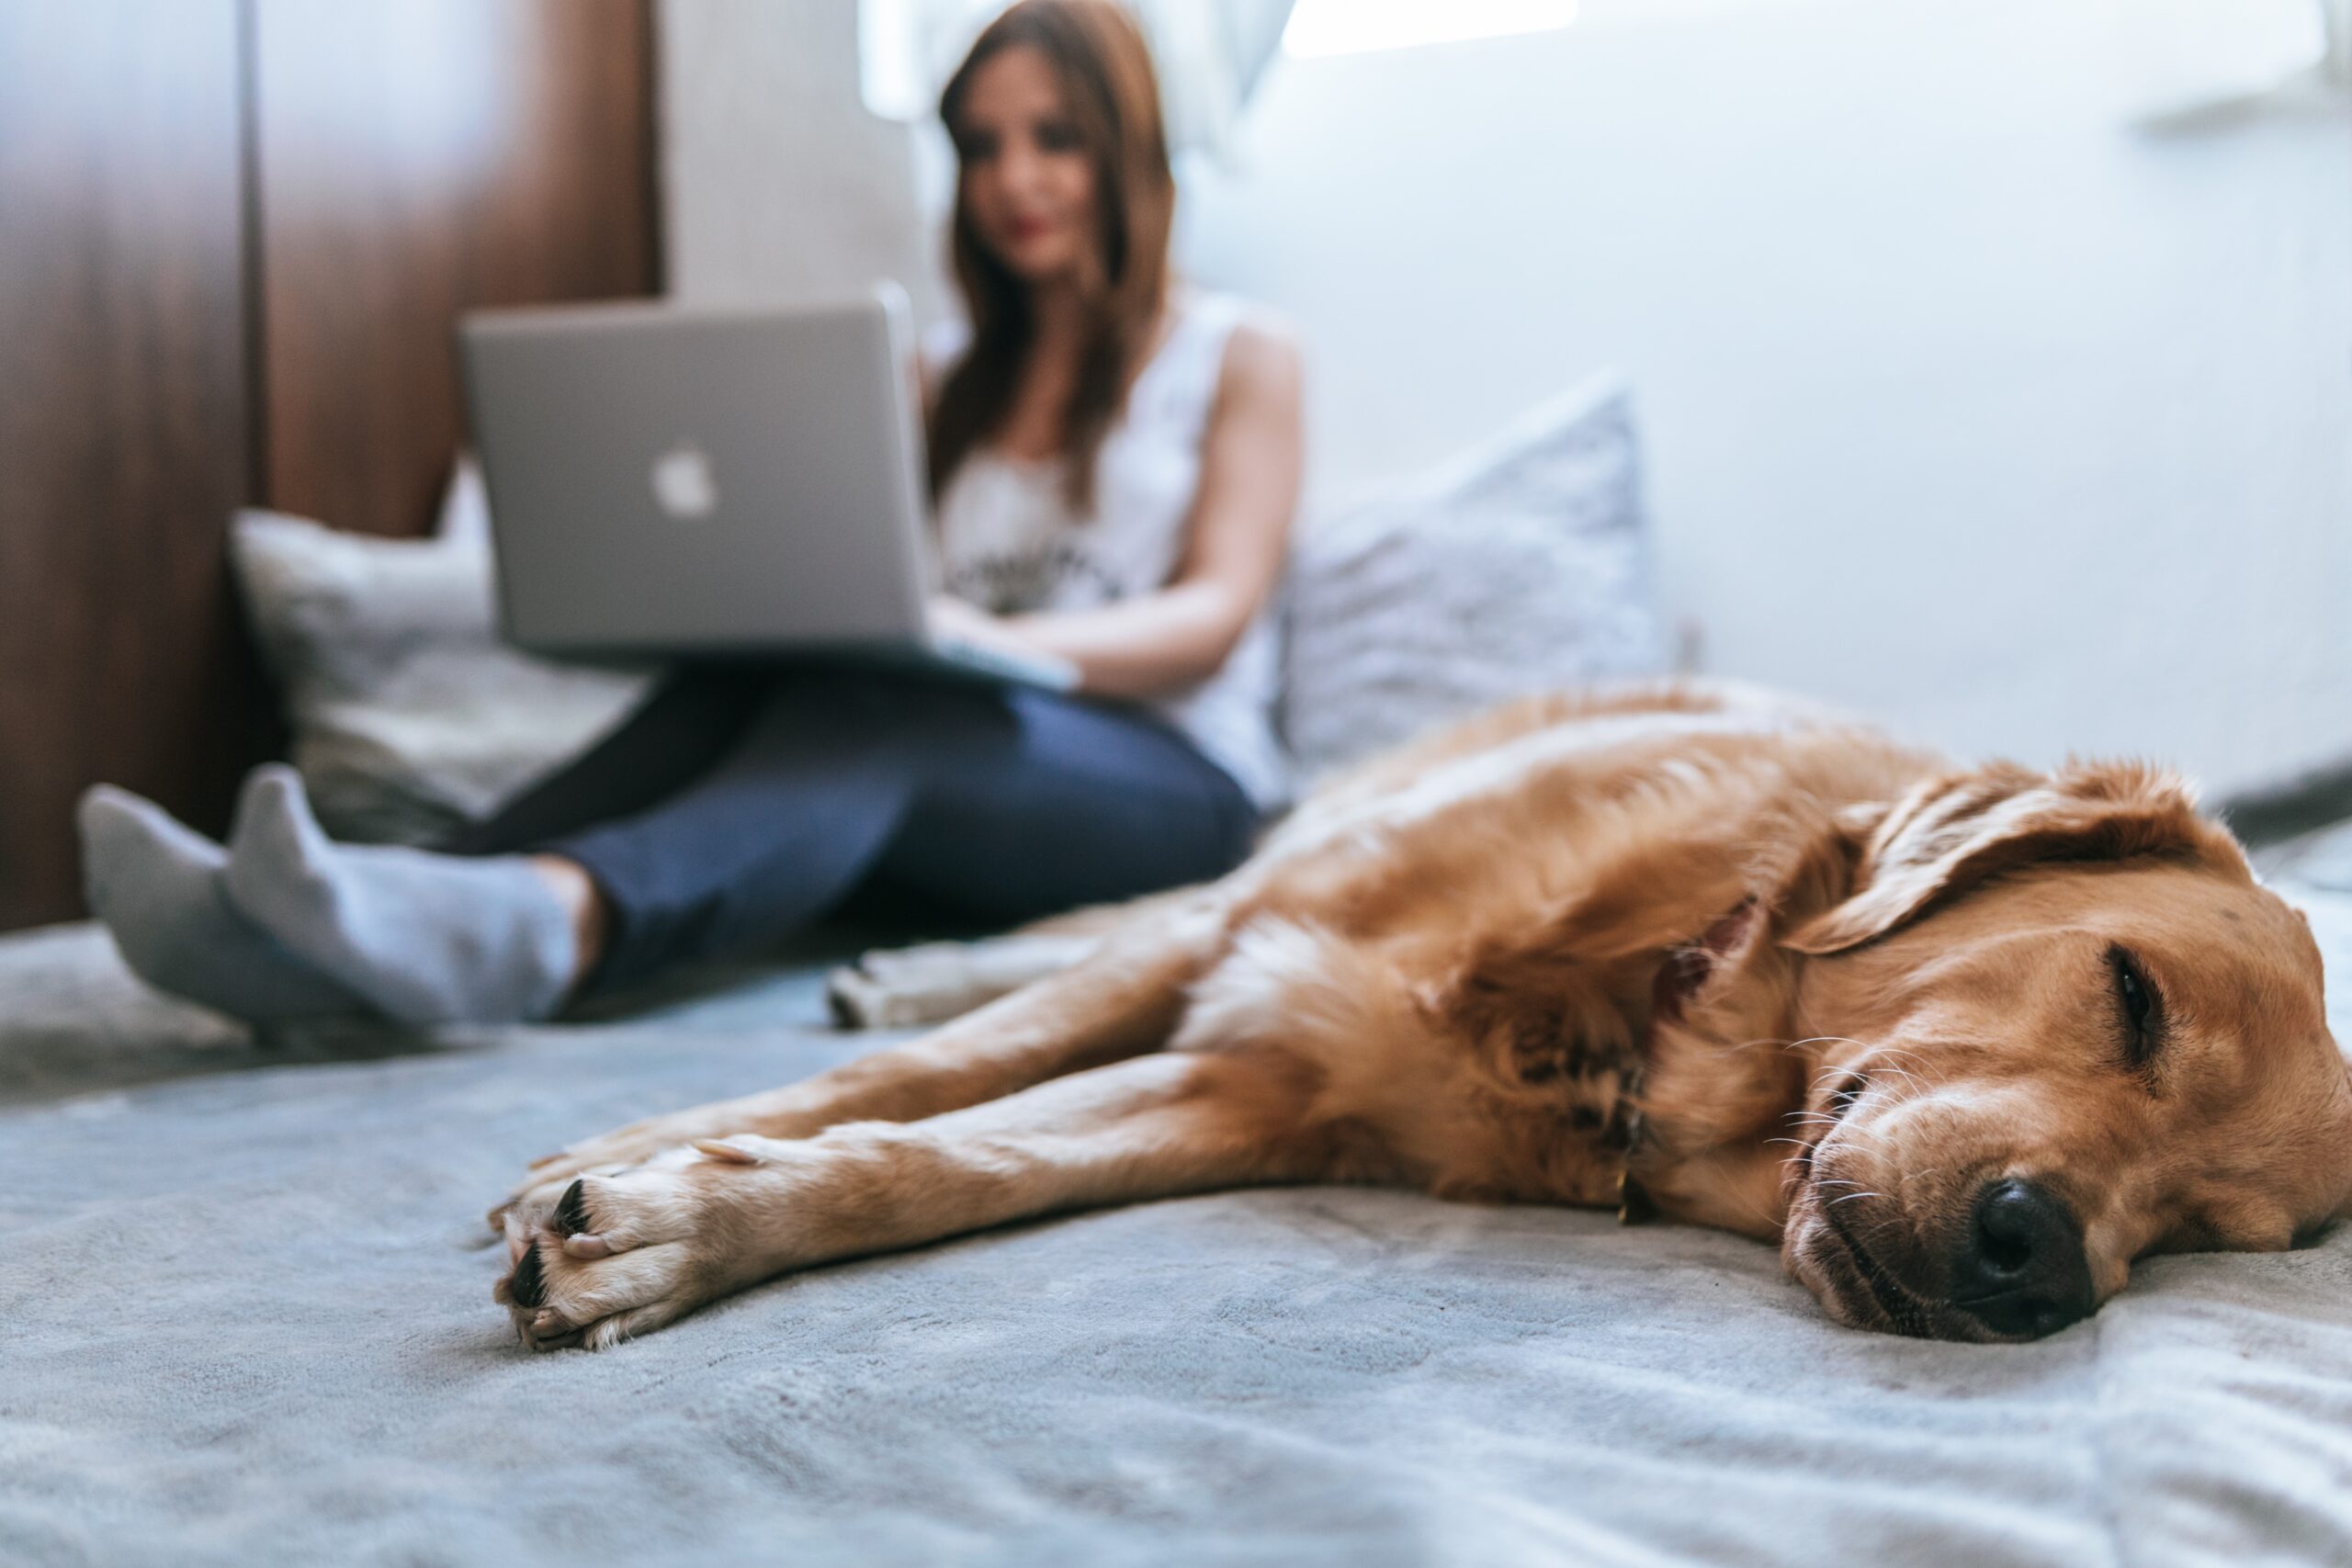 Golden retriever dog laying down next to a woman on her laptop. Woman on her laptop is blurry in the background and the dog is in focus.